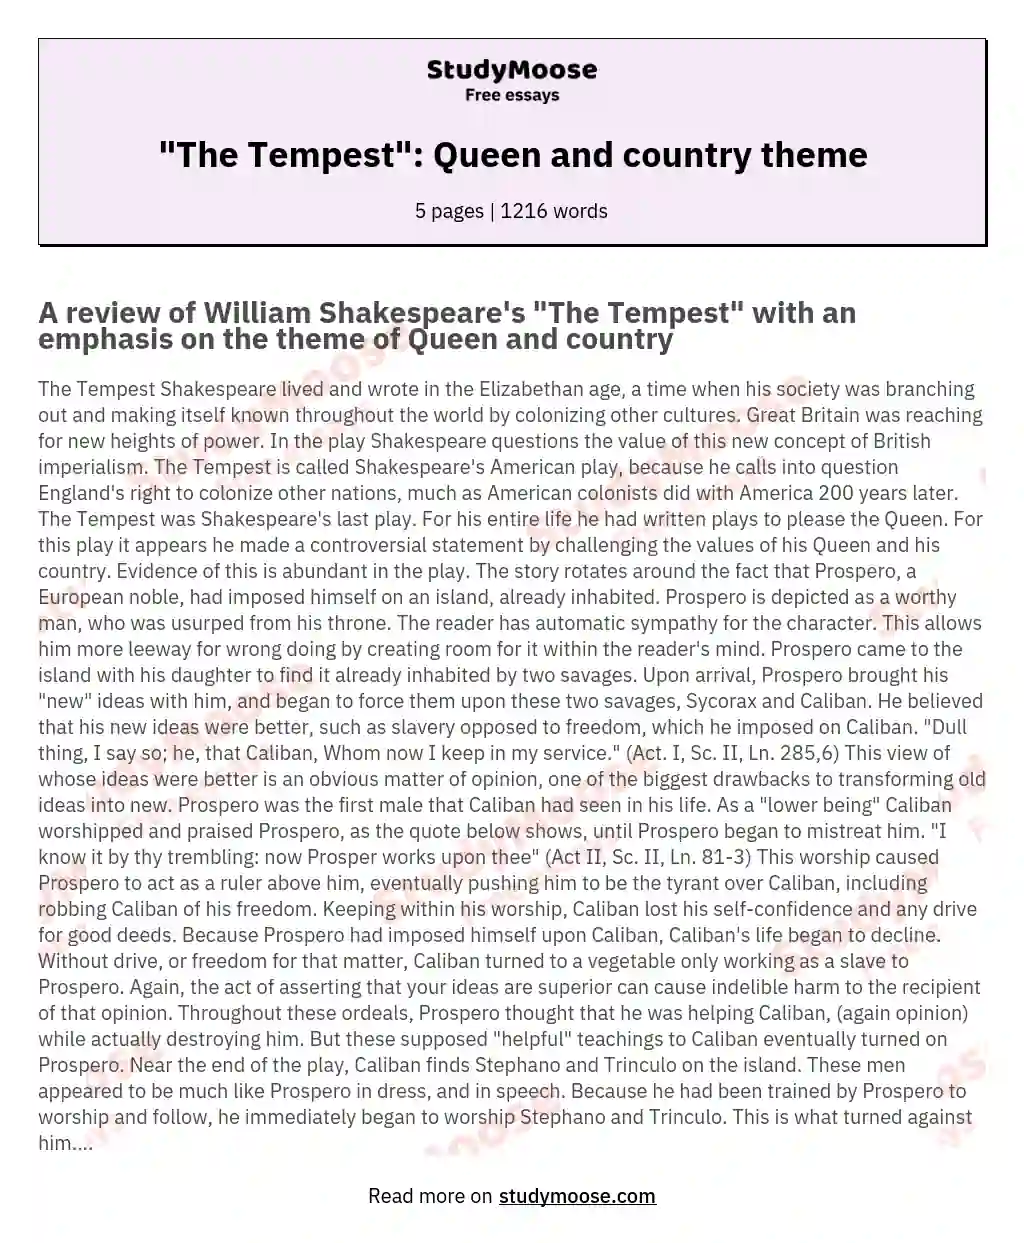 "The Tempest": Queen and country theme essay